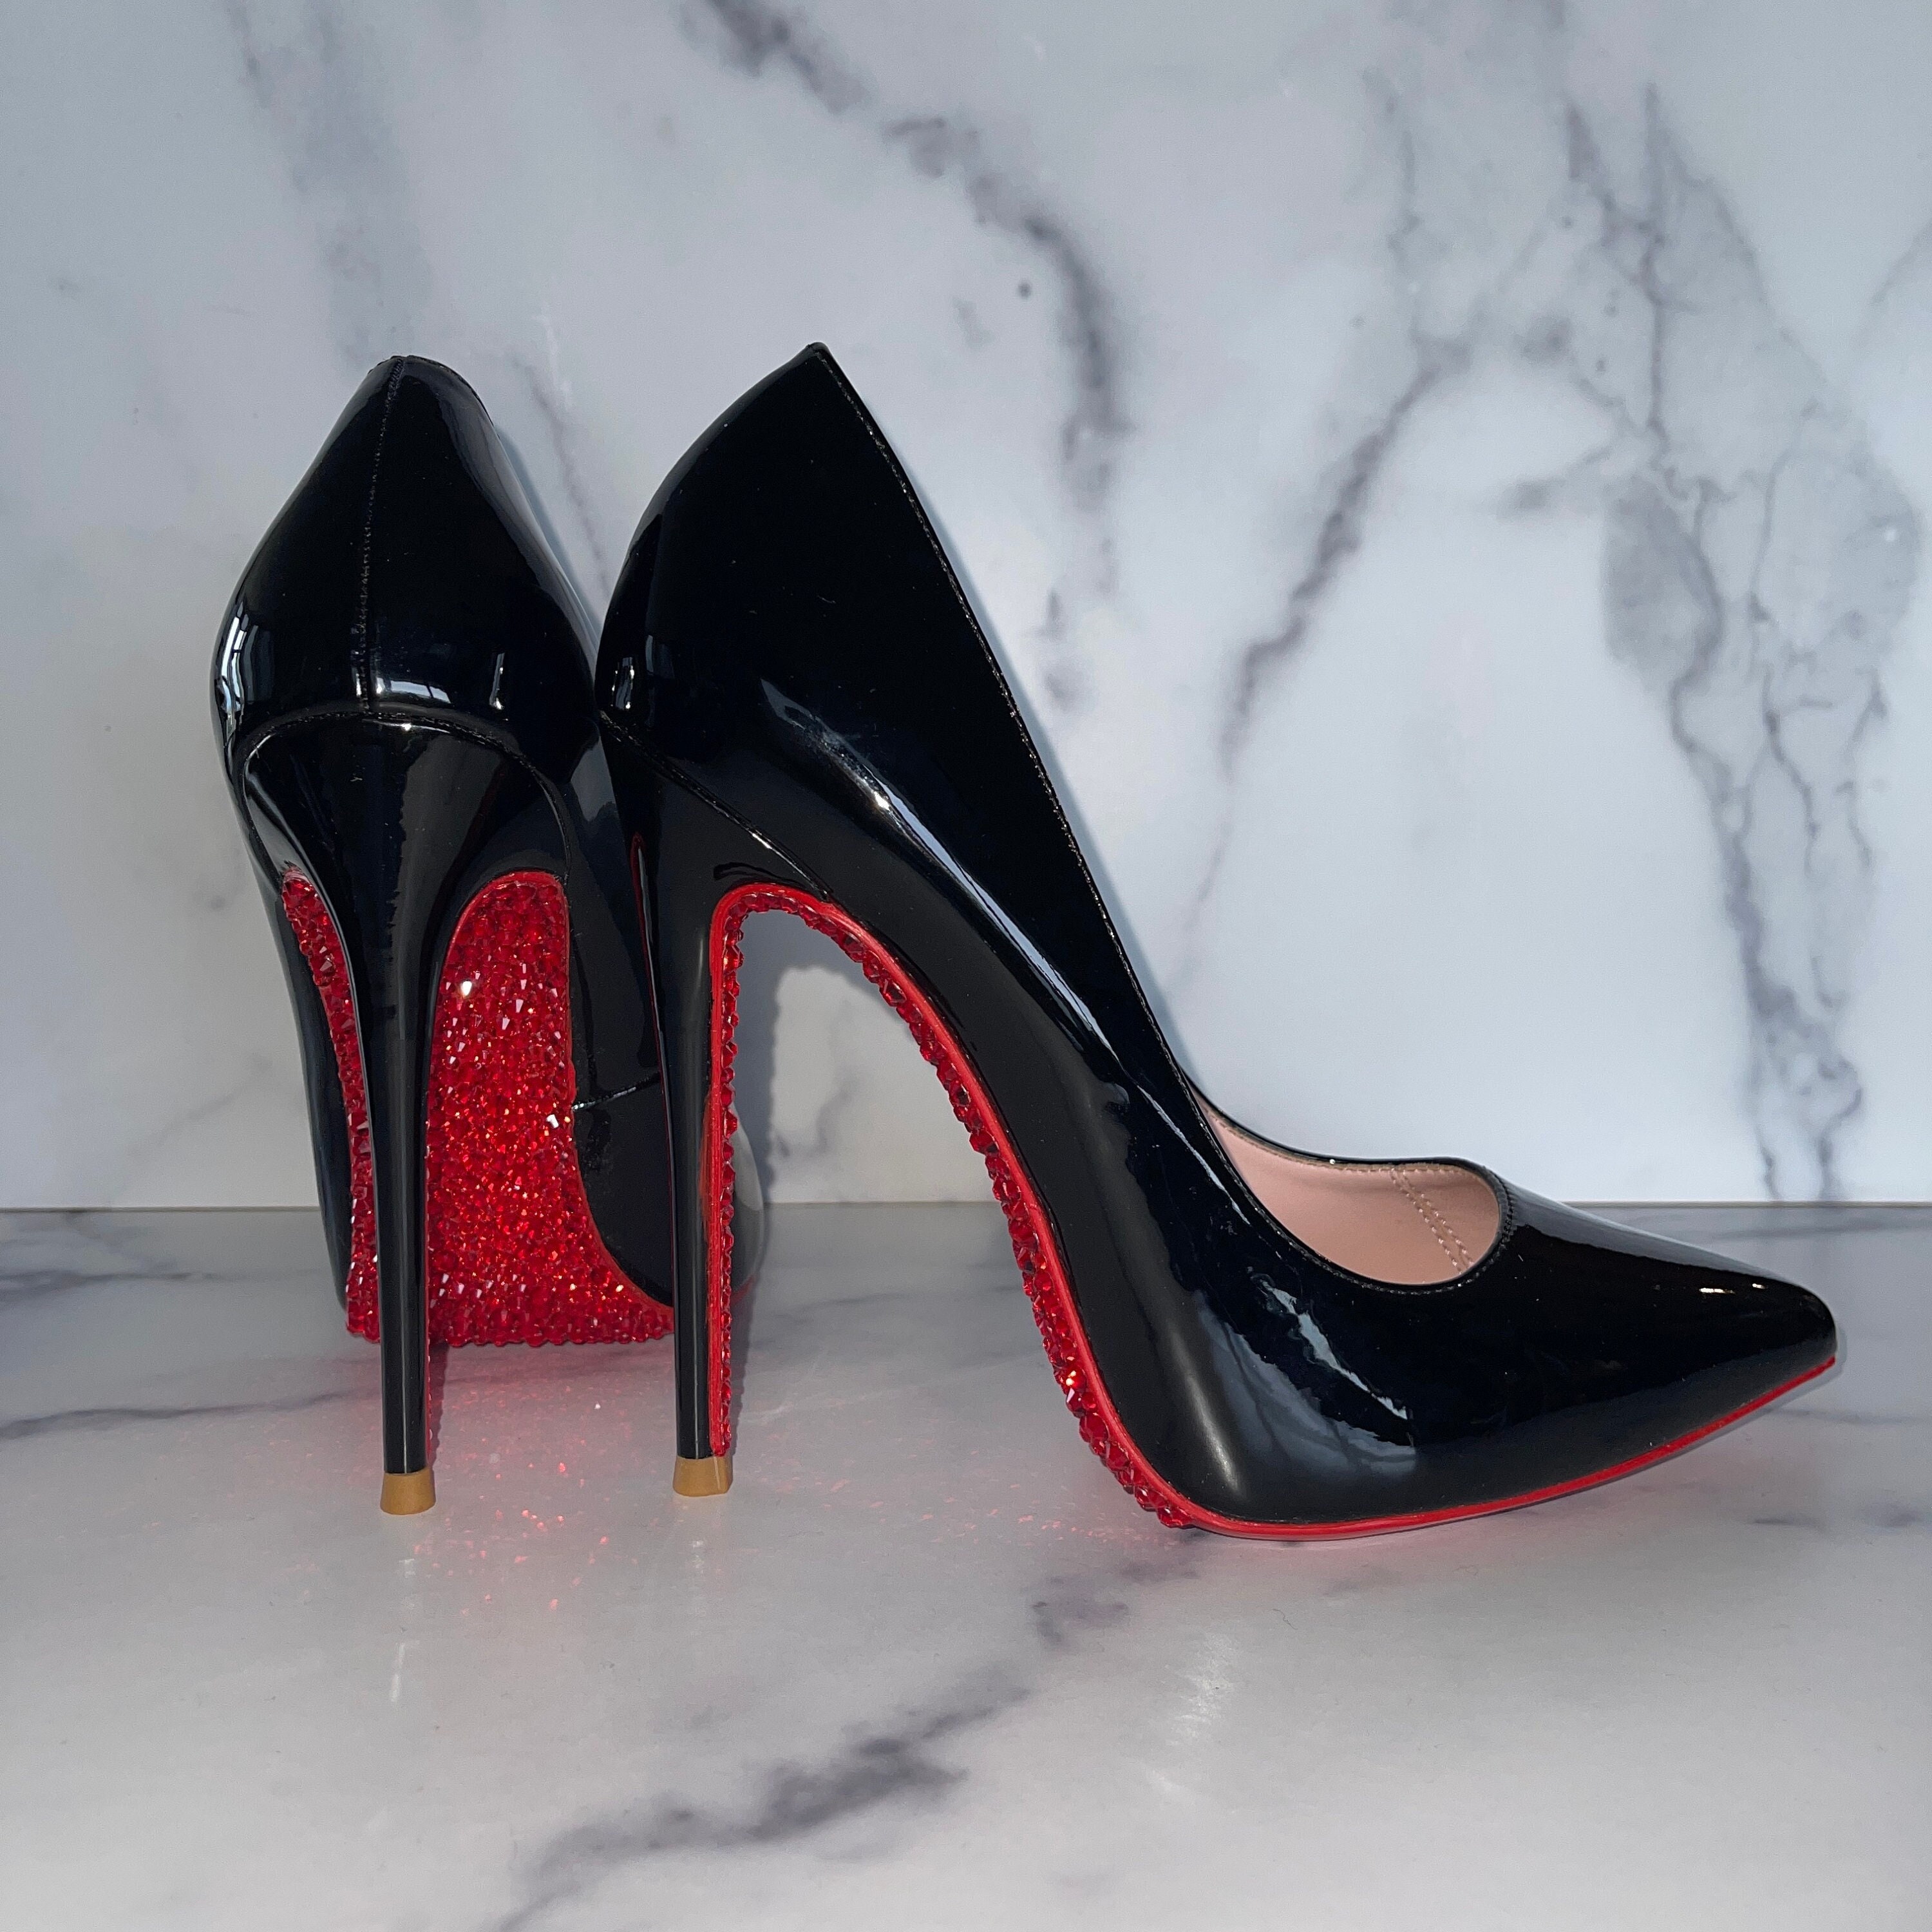 Buying A Pair Of High Heels: Here Are Things To Keep In Mind